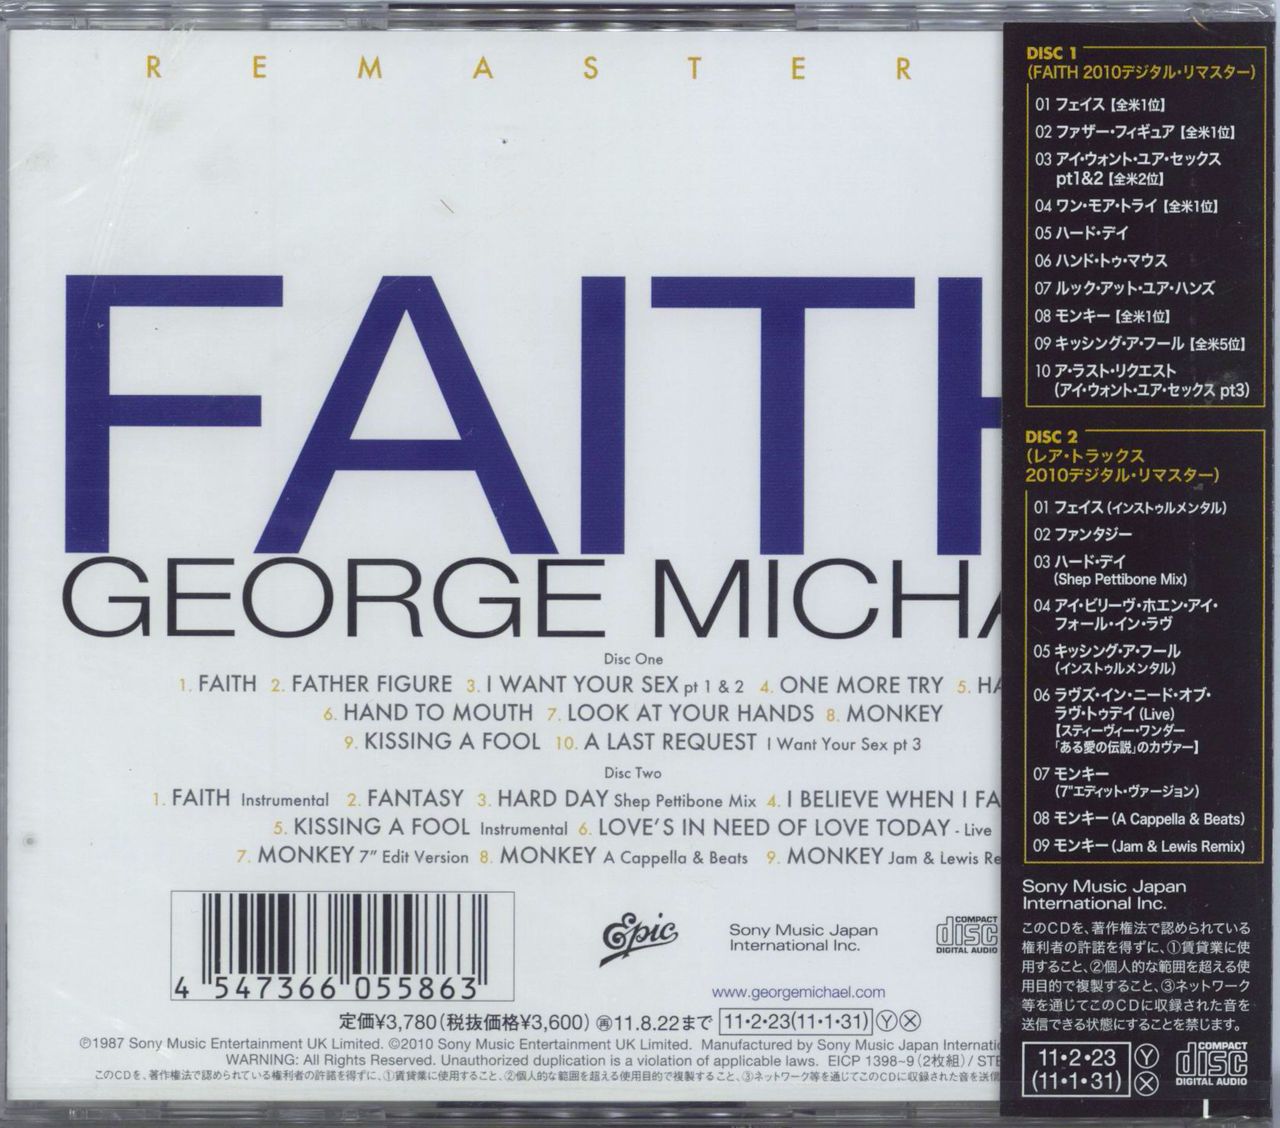 faith CD「INVENTION」「Letter To The Future」2枚セット★